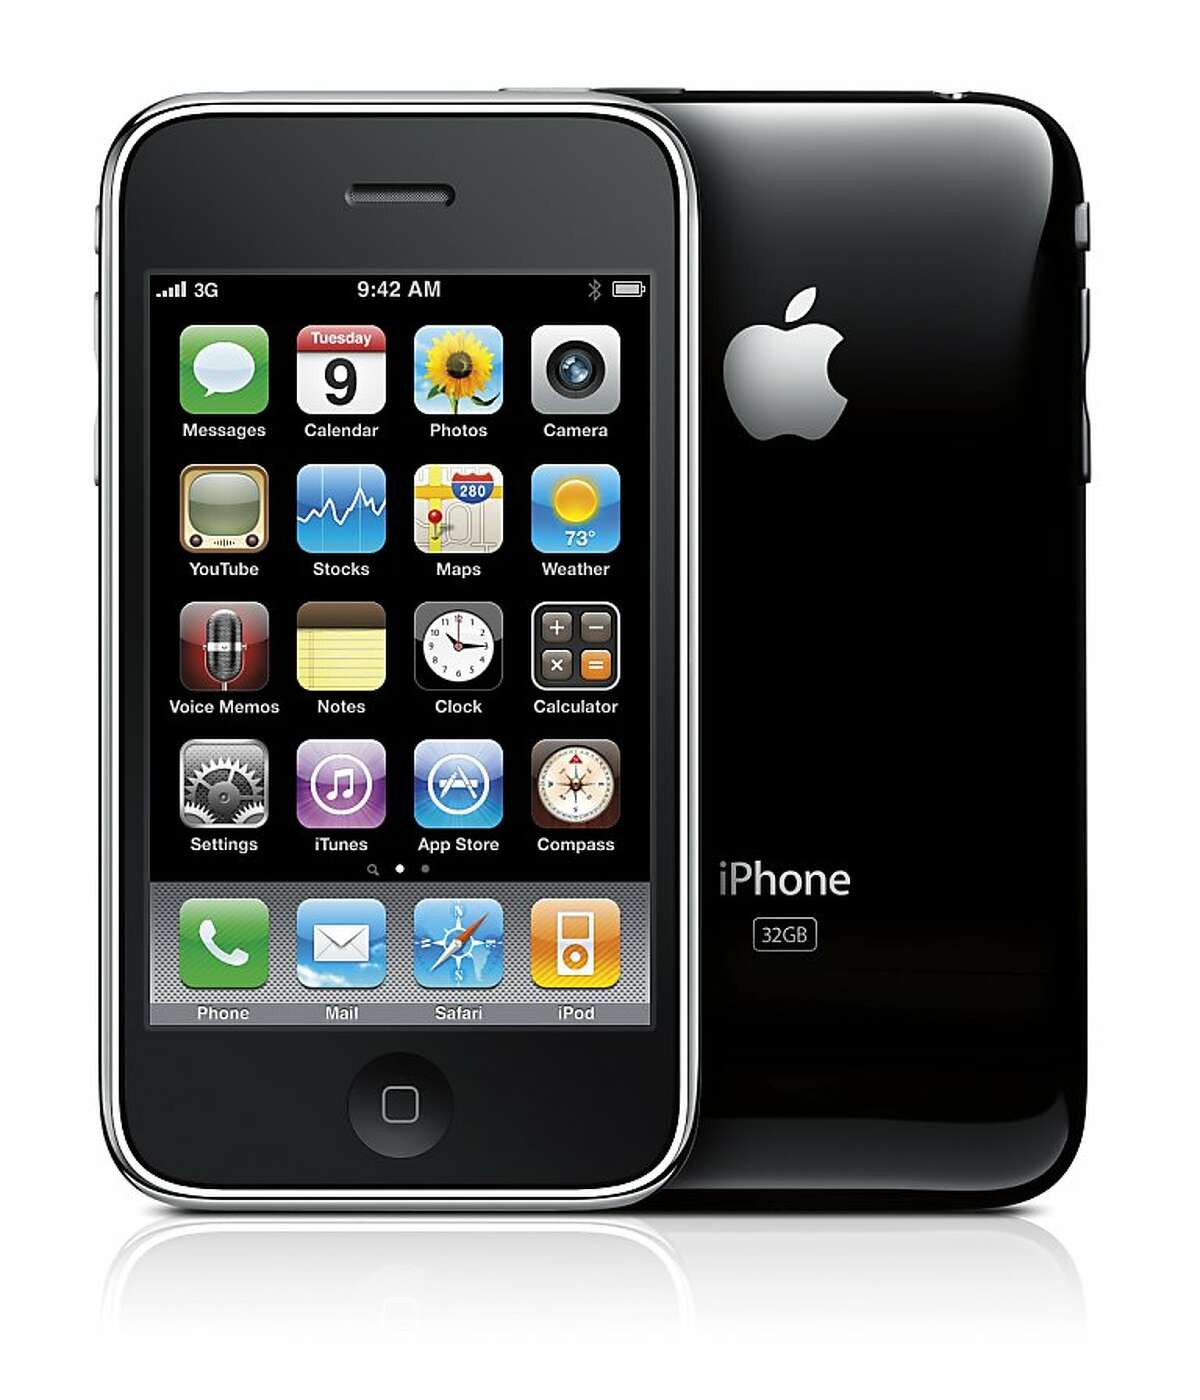 In this product image released by Apple Inc., Monday, June 8, 2009, the new iPhone 3Gs is shown. (AP Photo/Apple Inc.) ** NO SALES ** Ran on: 06-09-2009 Ran on: 01-06-2010 Photo caption Dummy text goes here. Dummy text goes here. Dummy text goes here. Dummy text goes here. Dummy text goes here. Dummy text goes here. Dummy text goes here. Dummy text goes here.###Photo: nexus06_PHuphone1244246400Apple Inc.###Live Caption:In this product image released by Apple Inc., Monday, June 8, 2009, the new iPhone 3Gs is shown. (AP Photo-Apple Inc.) ** NO SALES **###Caption History:In this product image released by Apple Inc., Monday, June 8, 2009, the new iPhone 3Gs is shown. (AP Photo-Apple Inc.) ** NO SALES ** Ran on: 06-09-2009###Notes:###Special Instructions:IN THIS PRODUCT IMAGE RELEASED BY APPLE INC., NO SALES AP PROVIDES ACCESS TO THIS PUBLICLY DISTRIBUTED HANDOUT PHOTO TO BE USED ONLY TO ILLUSTRATE NEWS REPORTING OR COMMENTARY ON THE FACTS OR EVENTS DEPICTED IN THIS IMAGE. AP provides access to this publi Ran on: 01-06-2010 Photo caption Dummy text goes here. Dummy text goes here. Dummy text goes here. Dummy text goes here. Dummy text goes here. Dummy text goes here. Dummy text goes here. Dummy text goes here.###Photo: nexus06_PHuphone1244246400Apple Inc.###Live Caption:In this product image released by Apple Inc., Monday, June 8, 2009, the new iPhone 3Gs is shown. (AP Photo-Apple Inc.) ** NO SALES **###Caption History:In this product image released by Apple Inc., Monday, June 8, 2009, the new iPhone 3Gs is shown. (AP Photo-Apple Inc.) ** NO SALES ** Ran on: 06-09-2009###Notes:###Special...